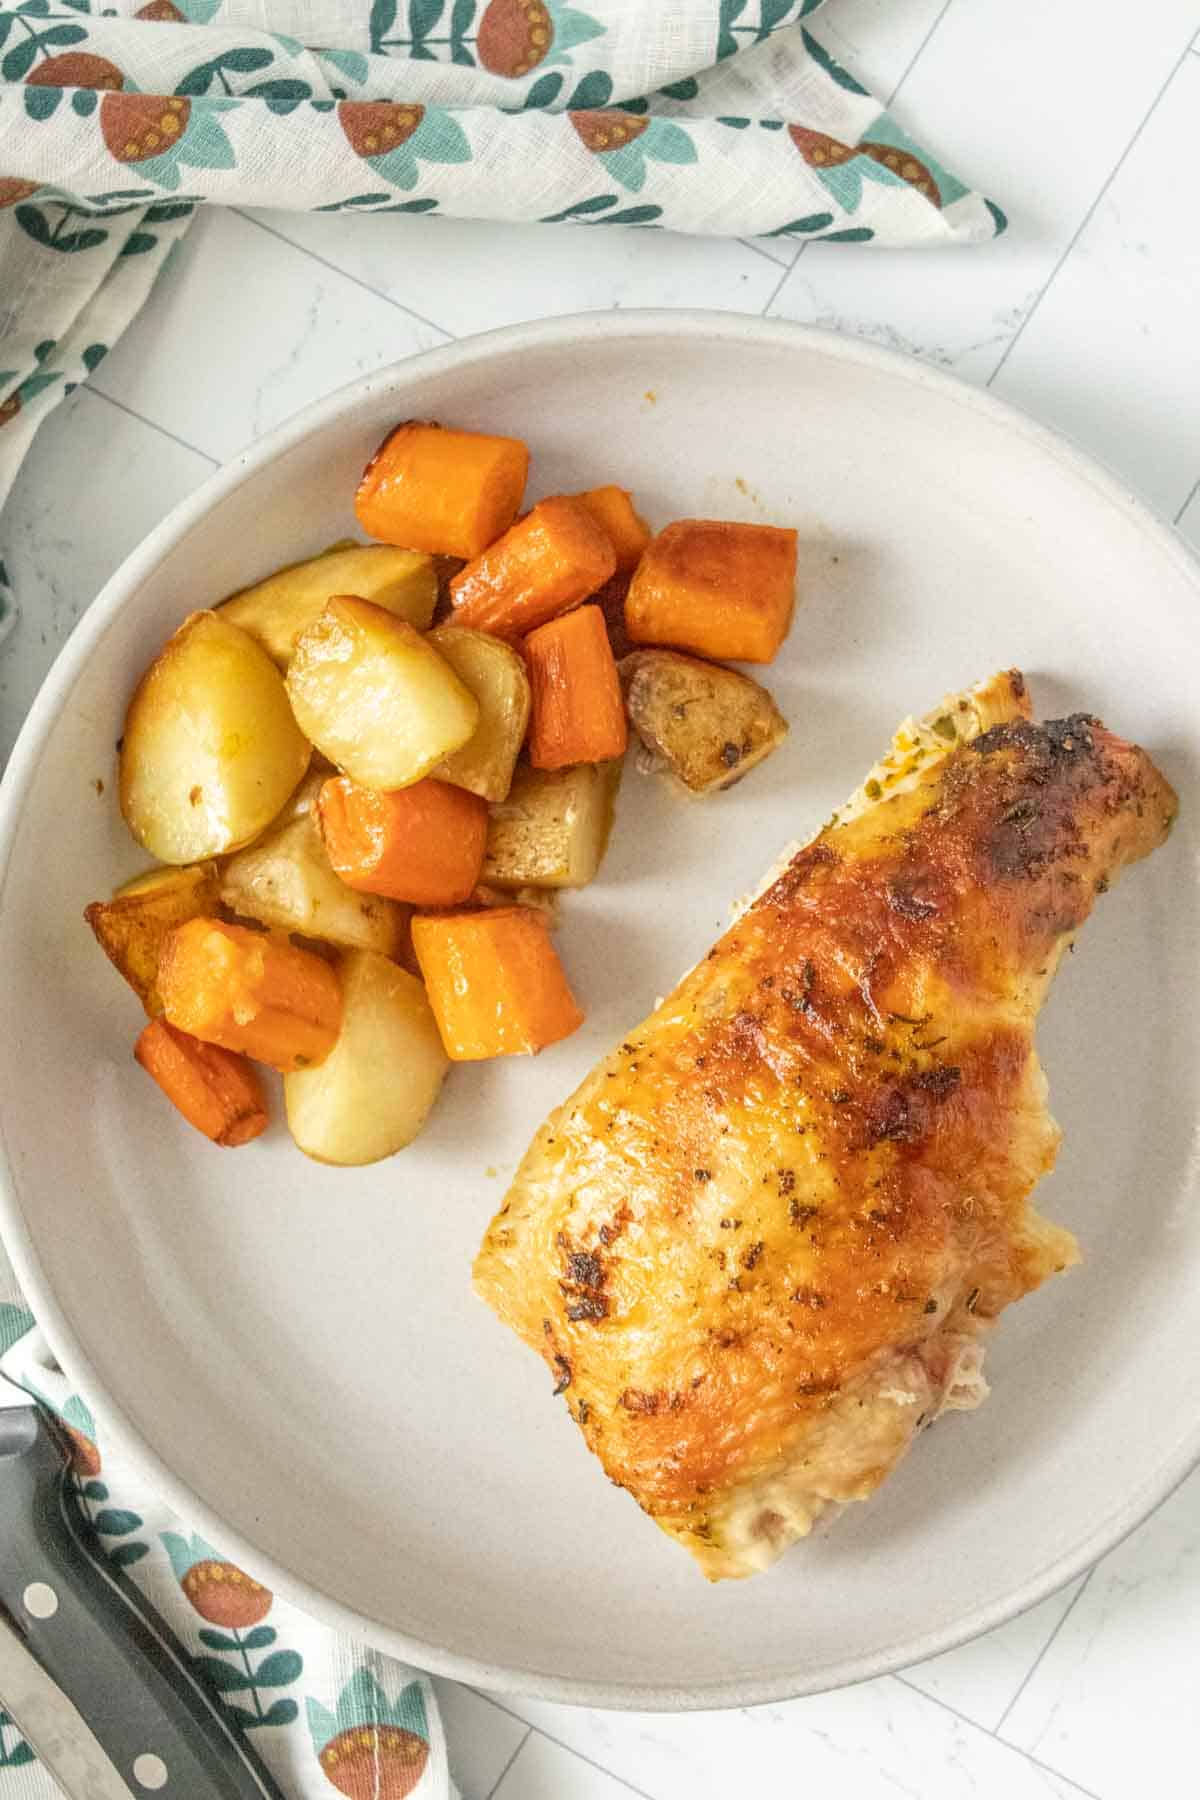 Roasted chicken with carrots and potatoes on a white plate.